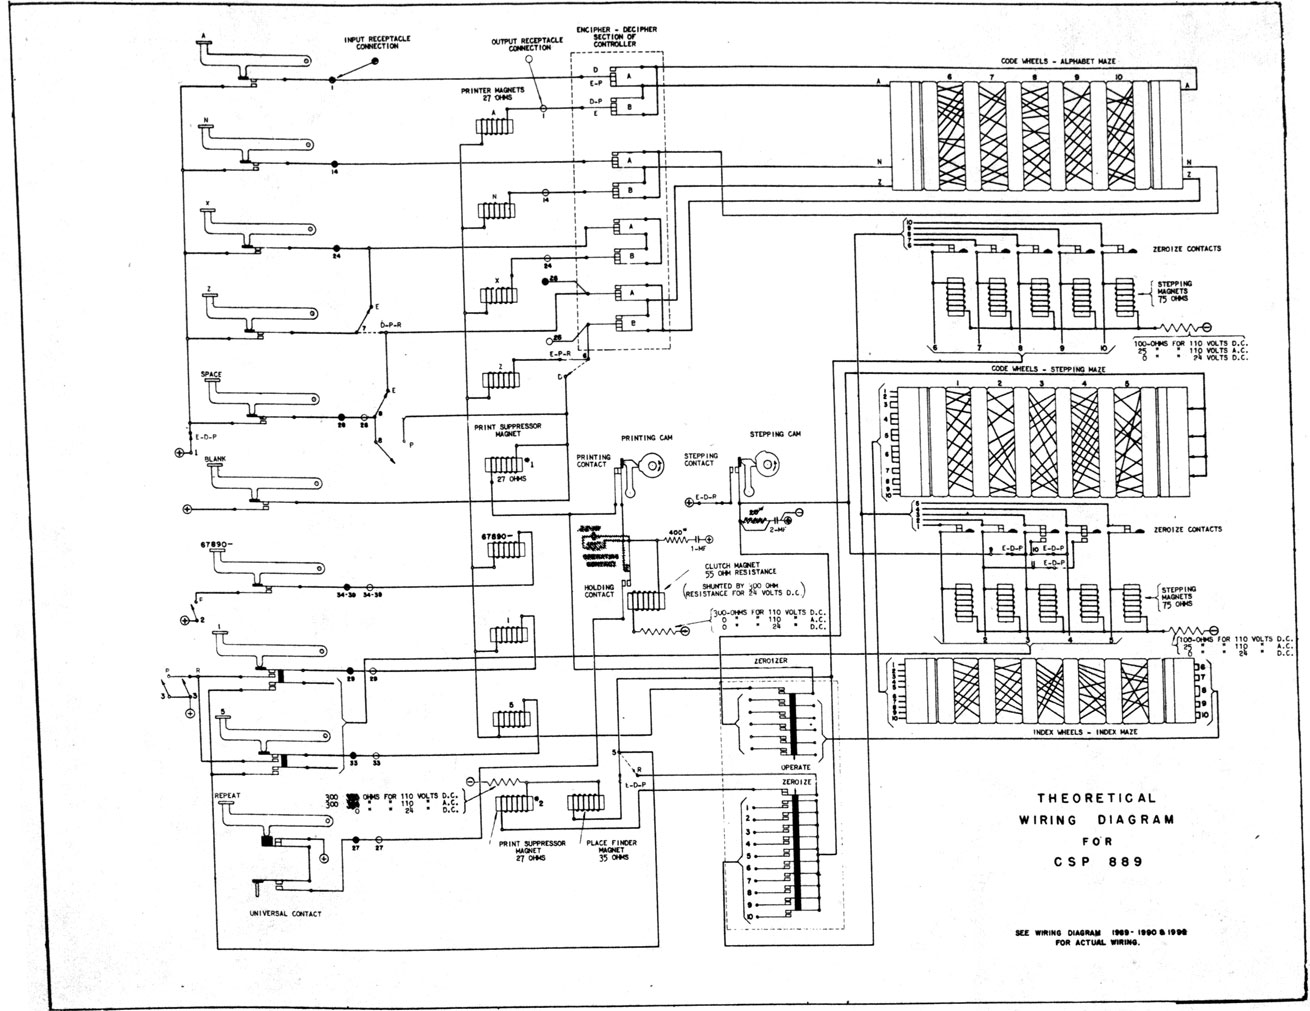 Theoretical Wiring Diagram for CSP 889